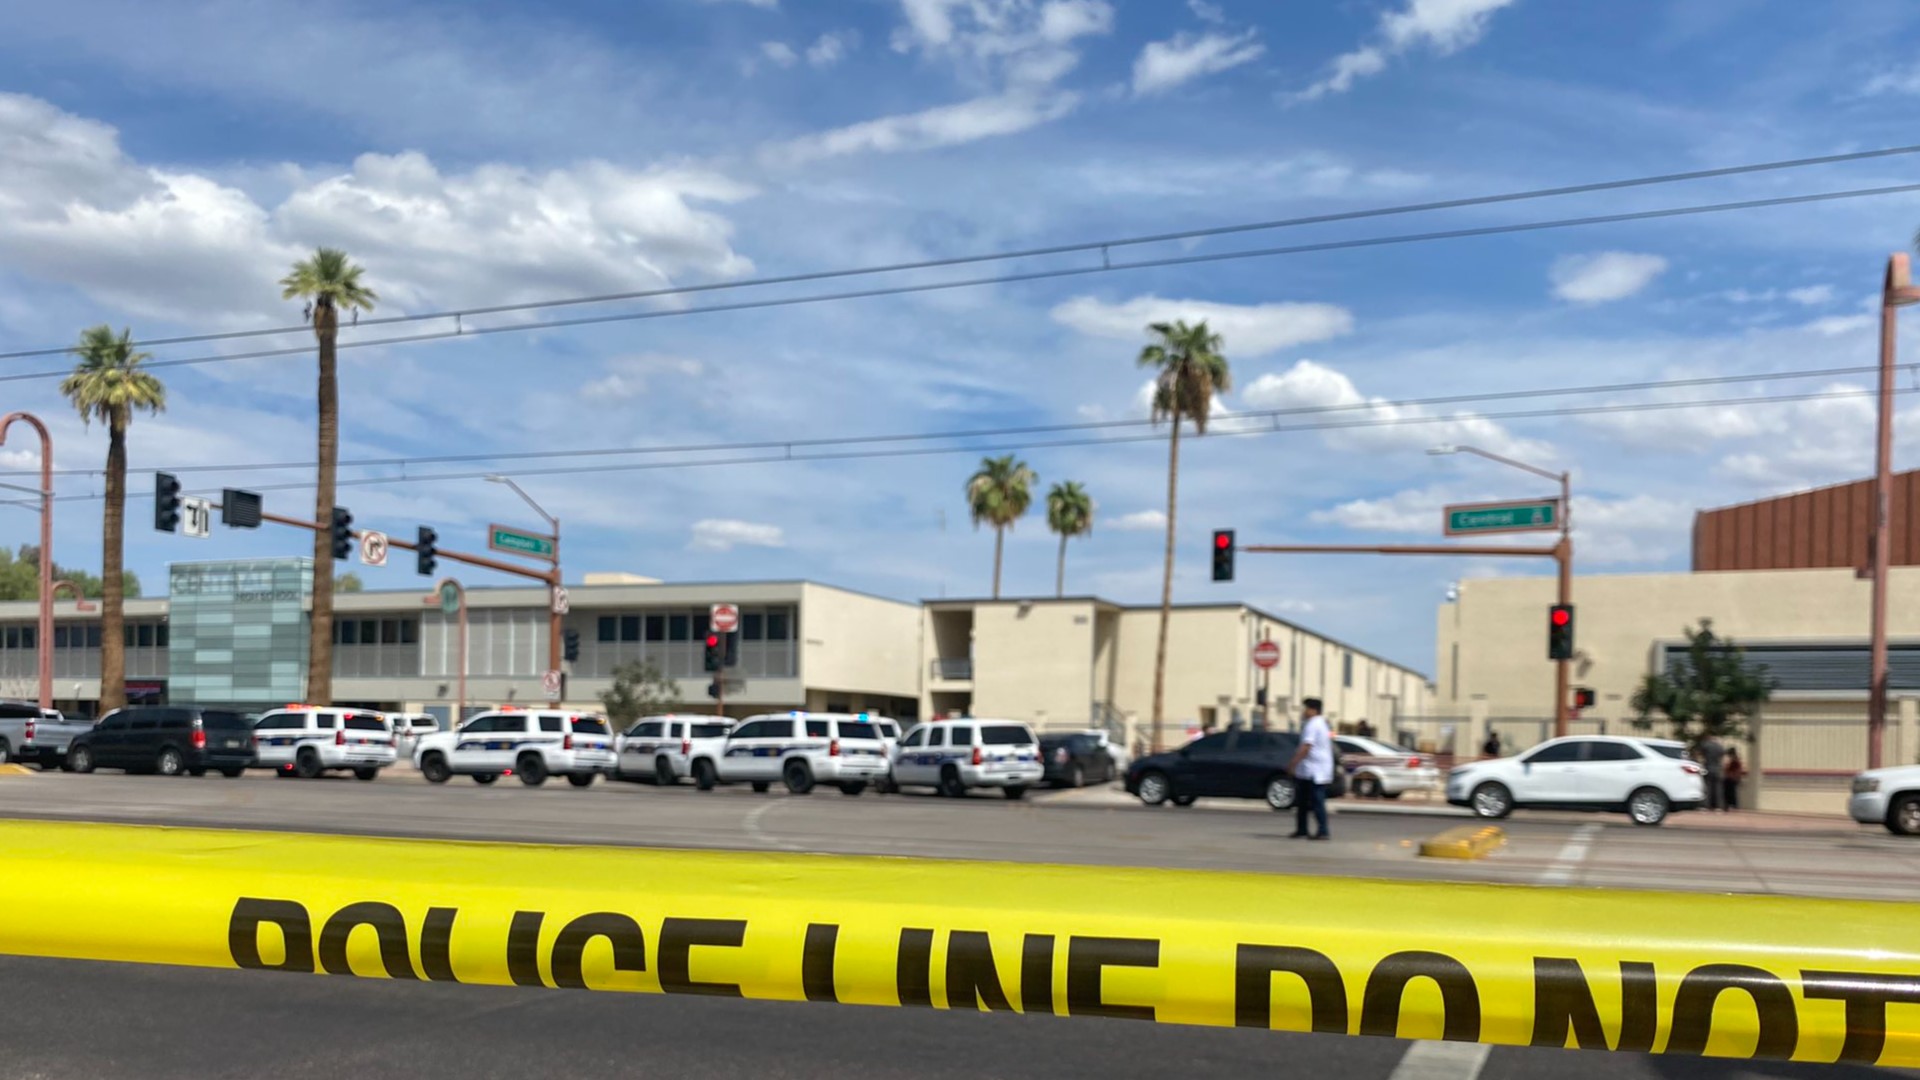 The incident caused a lockdown at Central High School and three other nearby schools in central Phoenix Friday afternoon. No one was hurt.